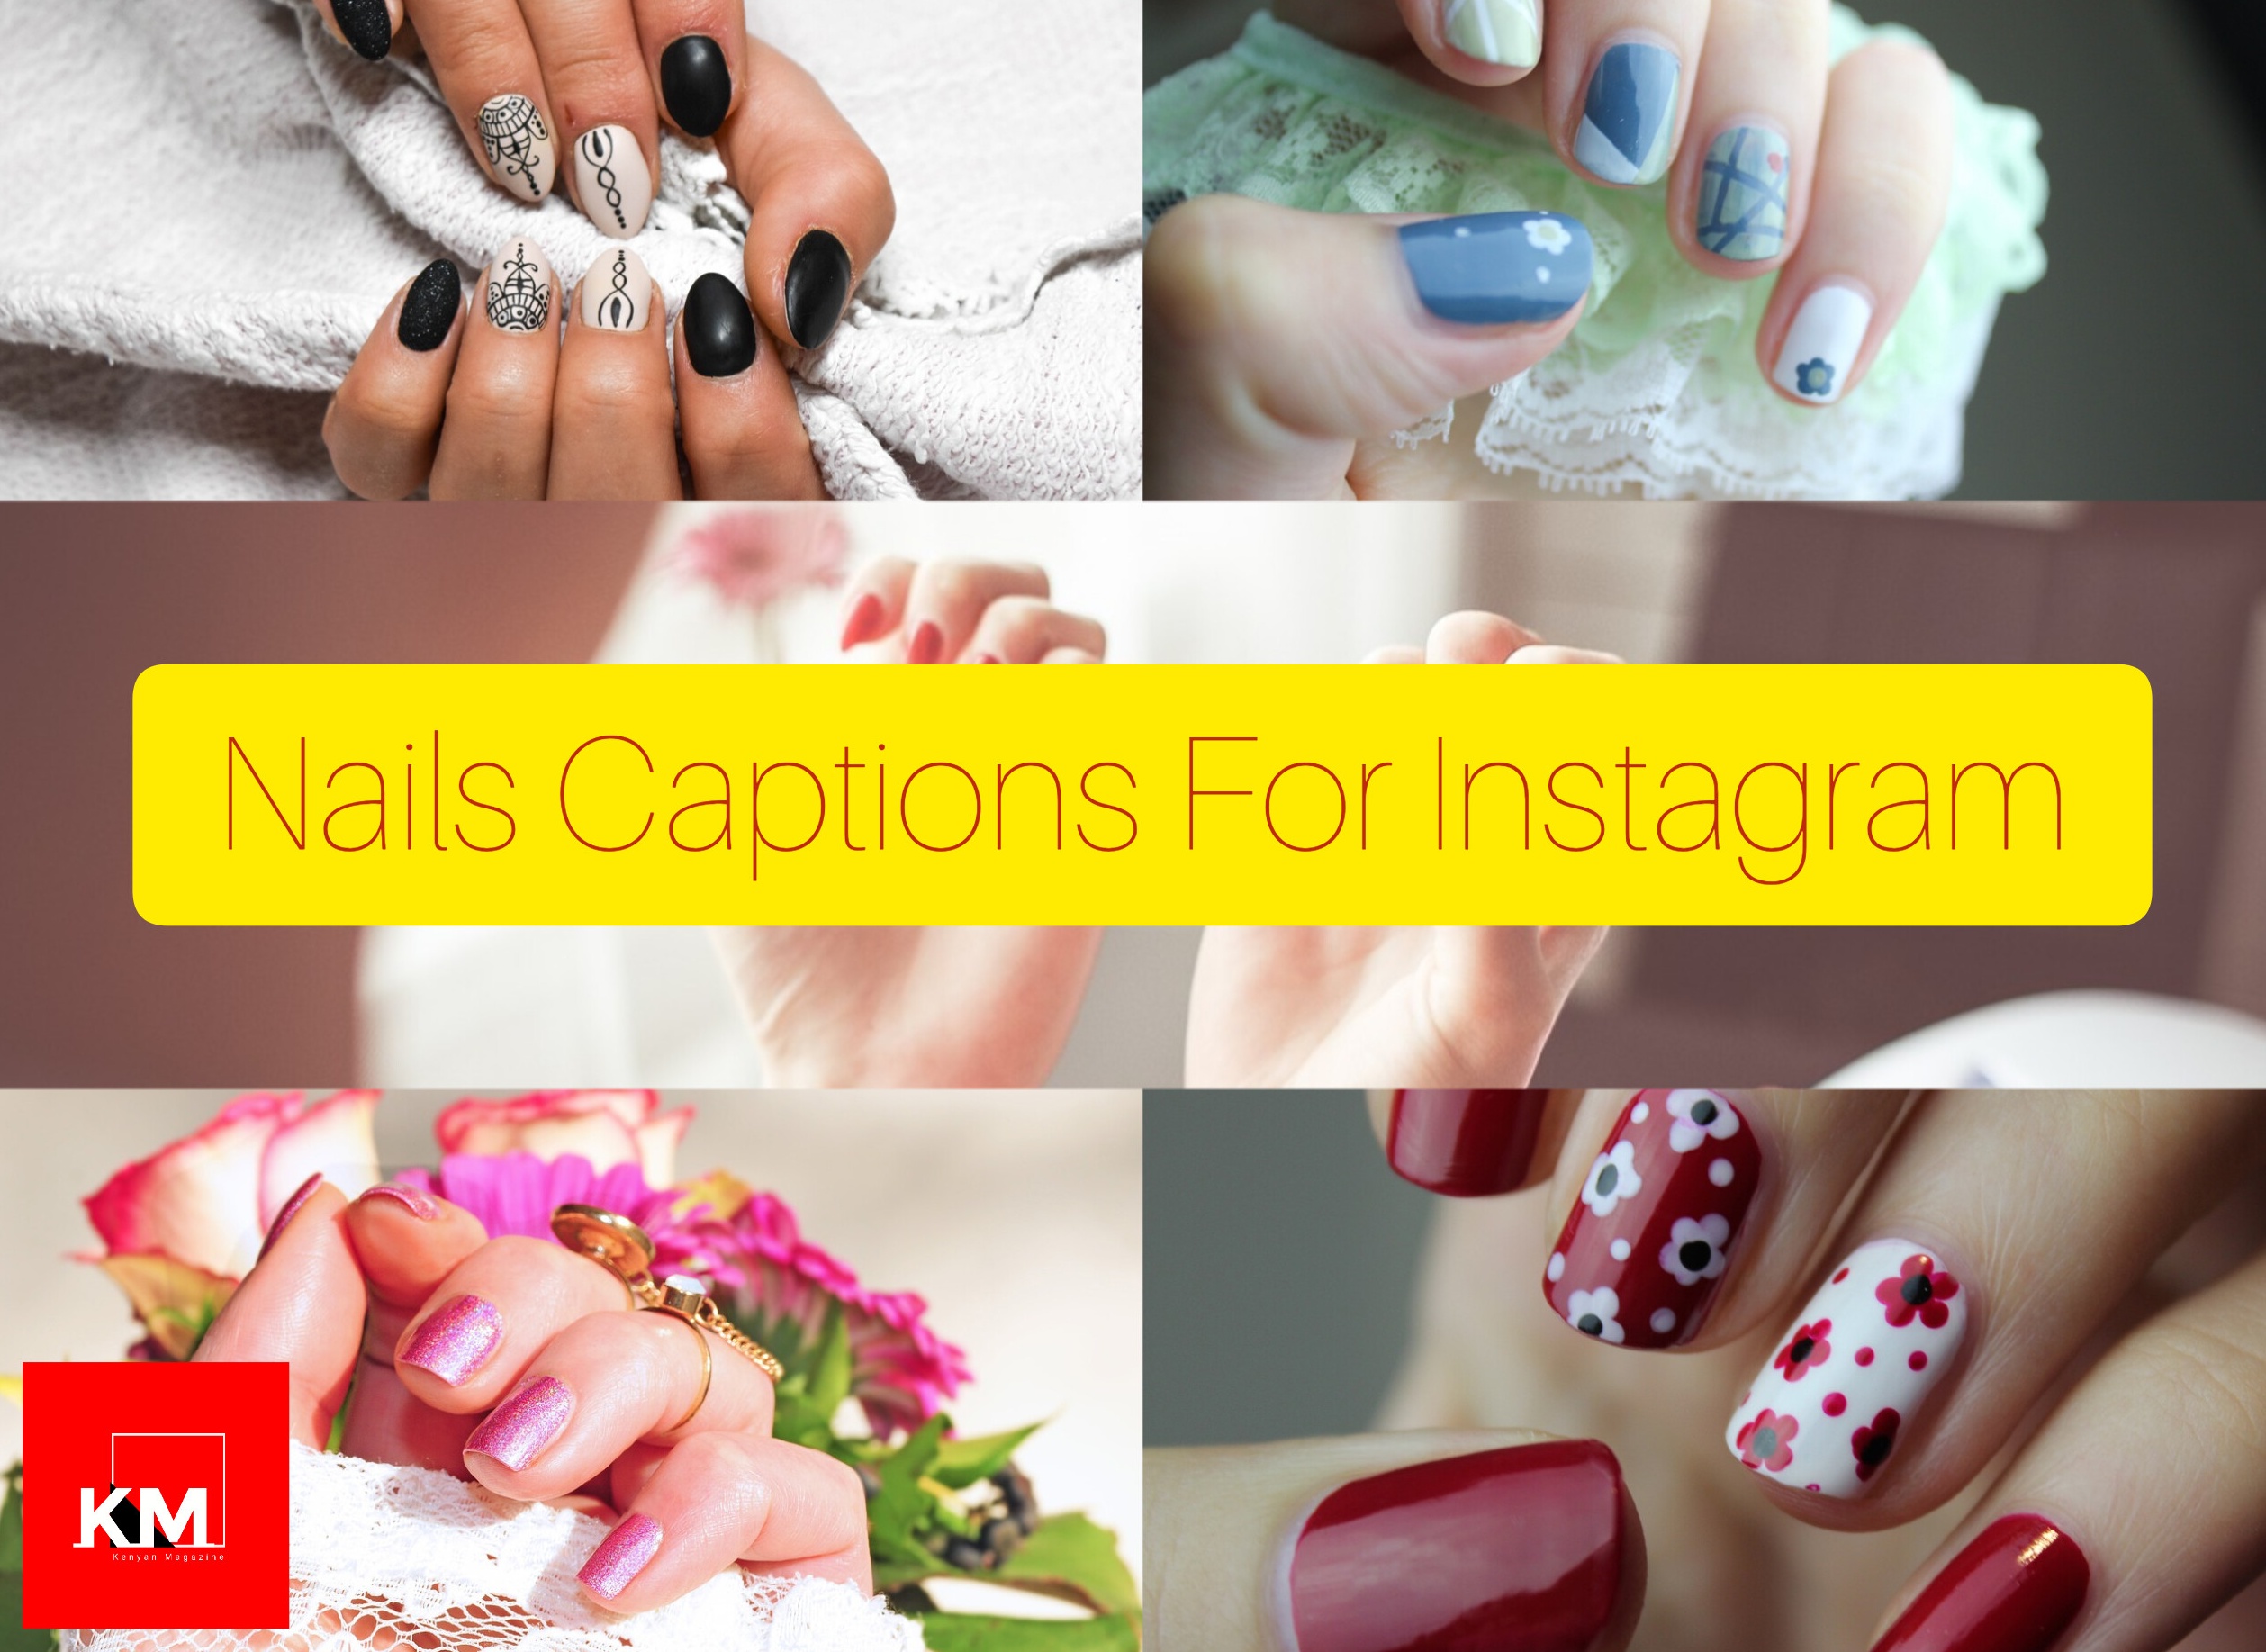 Nails Captions For Instagram